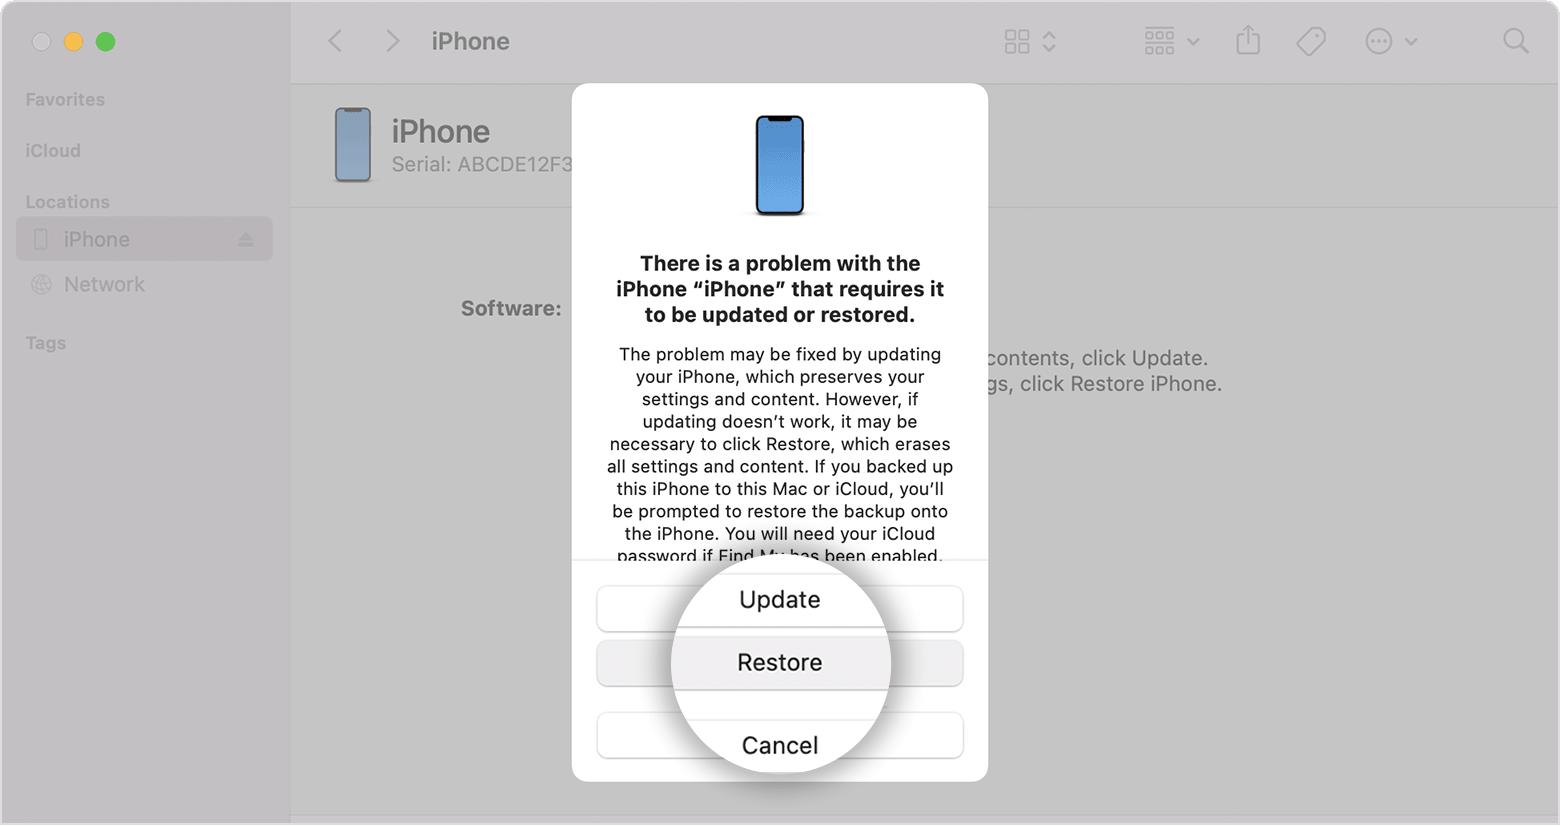 You can restore your iPhone through Finder after you've connected your iPhone to your computer.